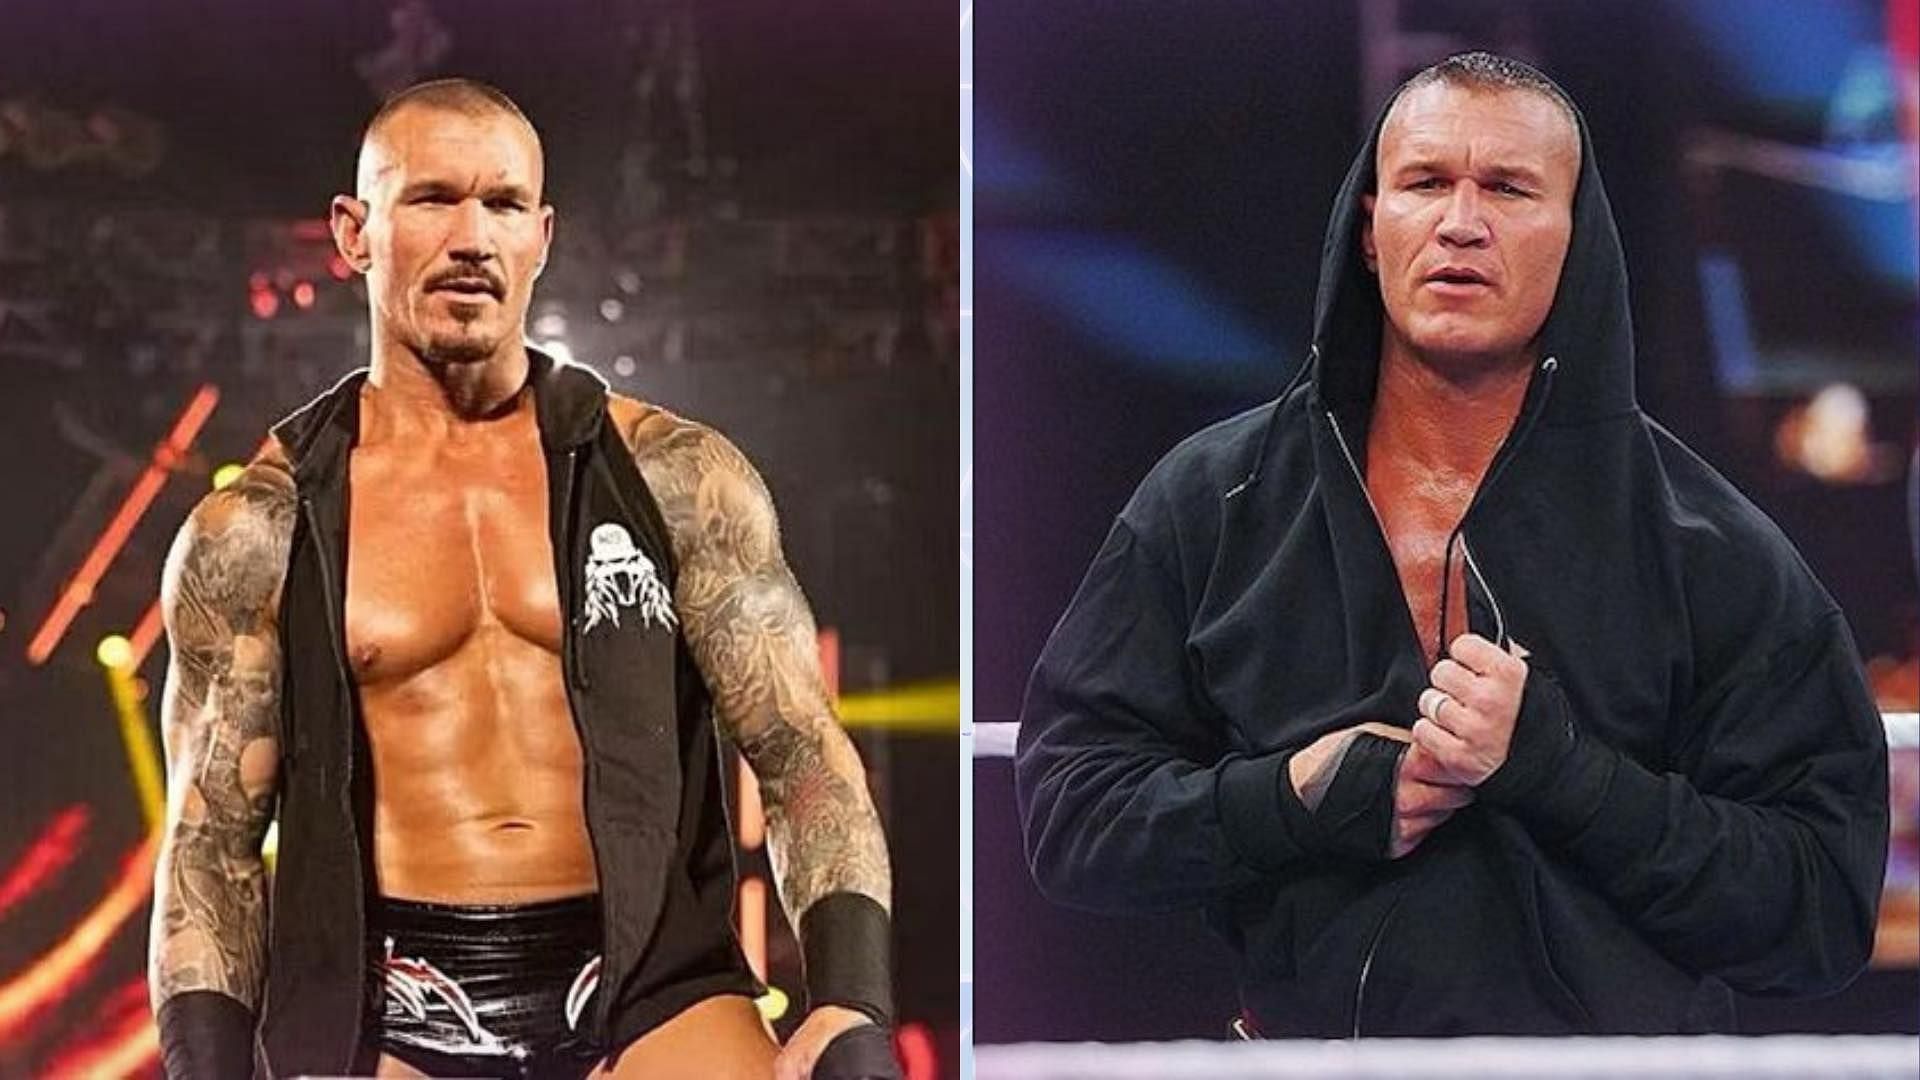 Randy Orton might not be returning at WWE SummerSlam